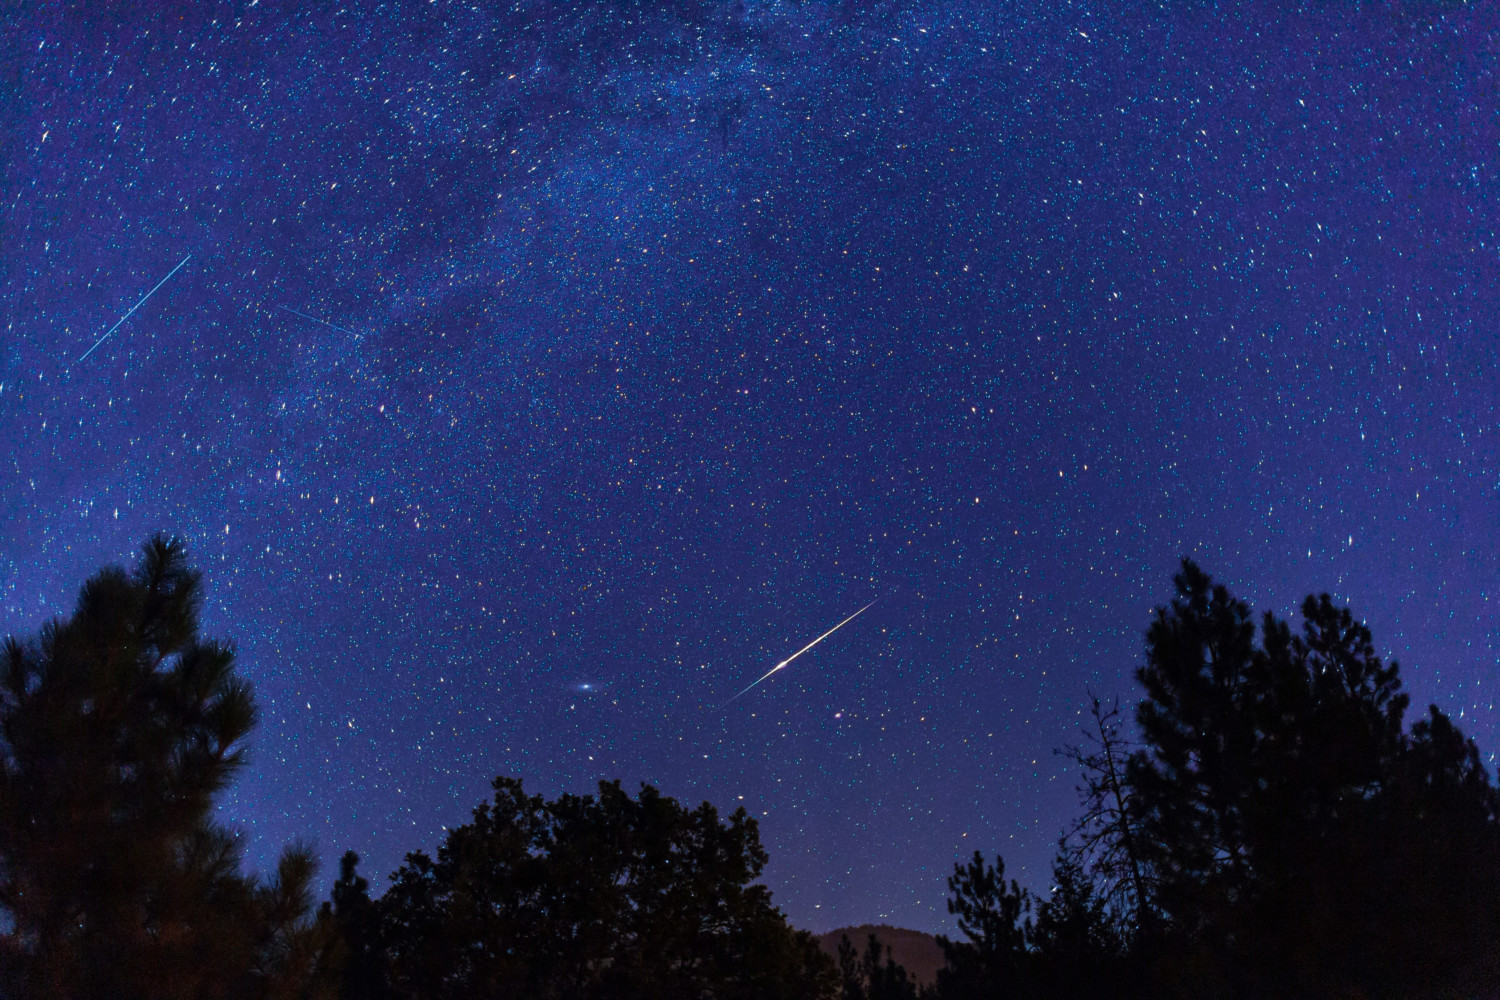 meteor in dark blue night sky with silhouetted trees framing the bottom of the image